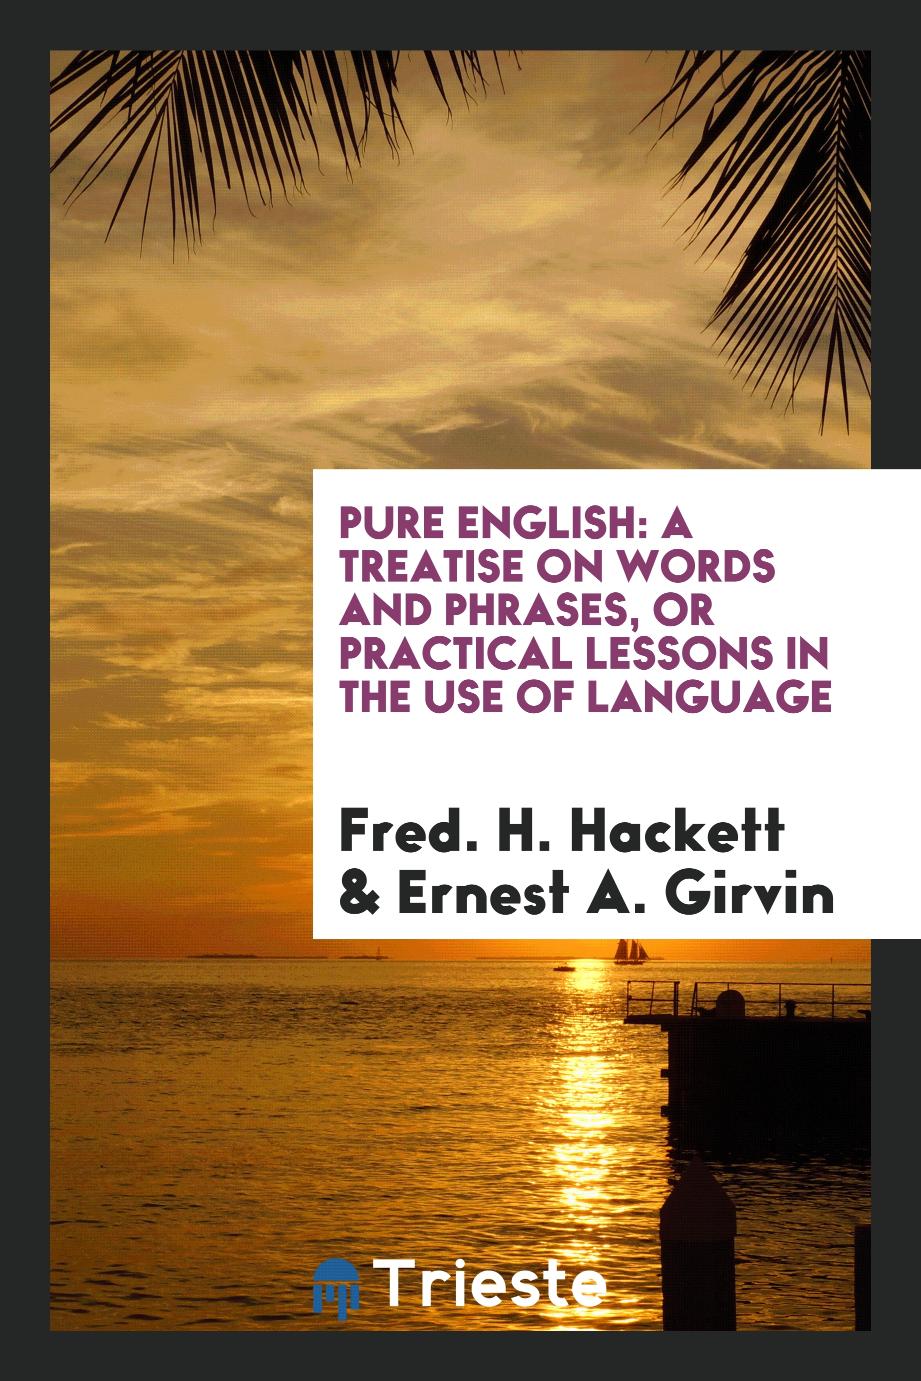 Pure English: a treatise on words and phrases, or practical lessons in the use of language